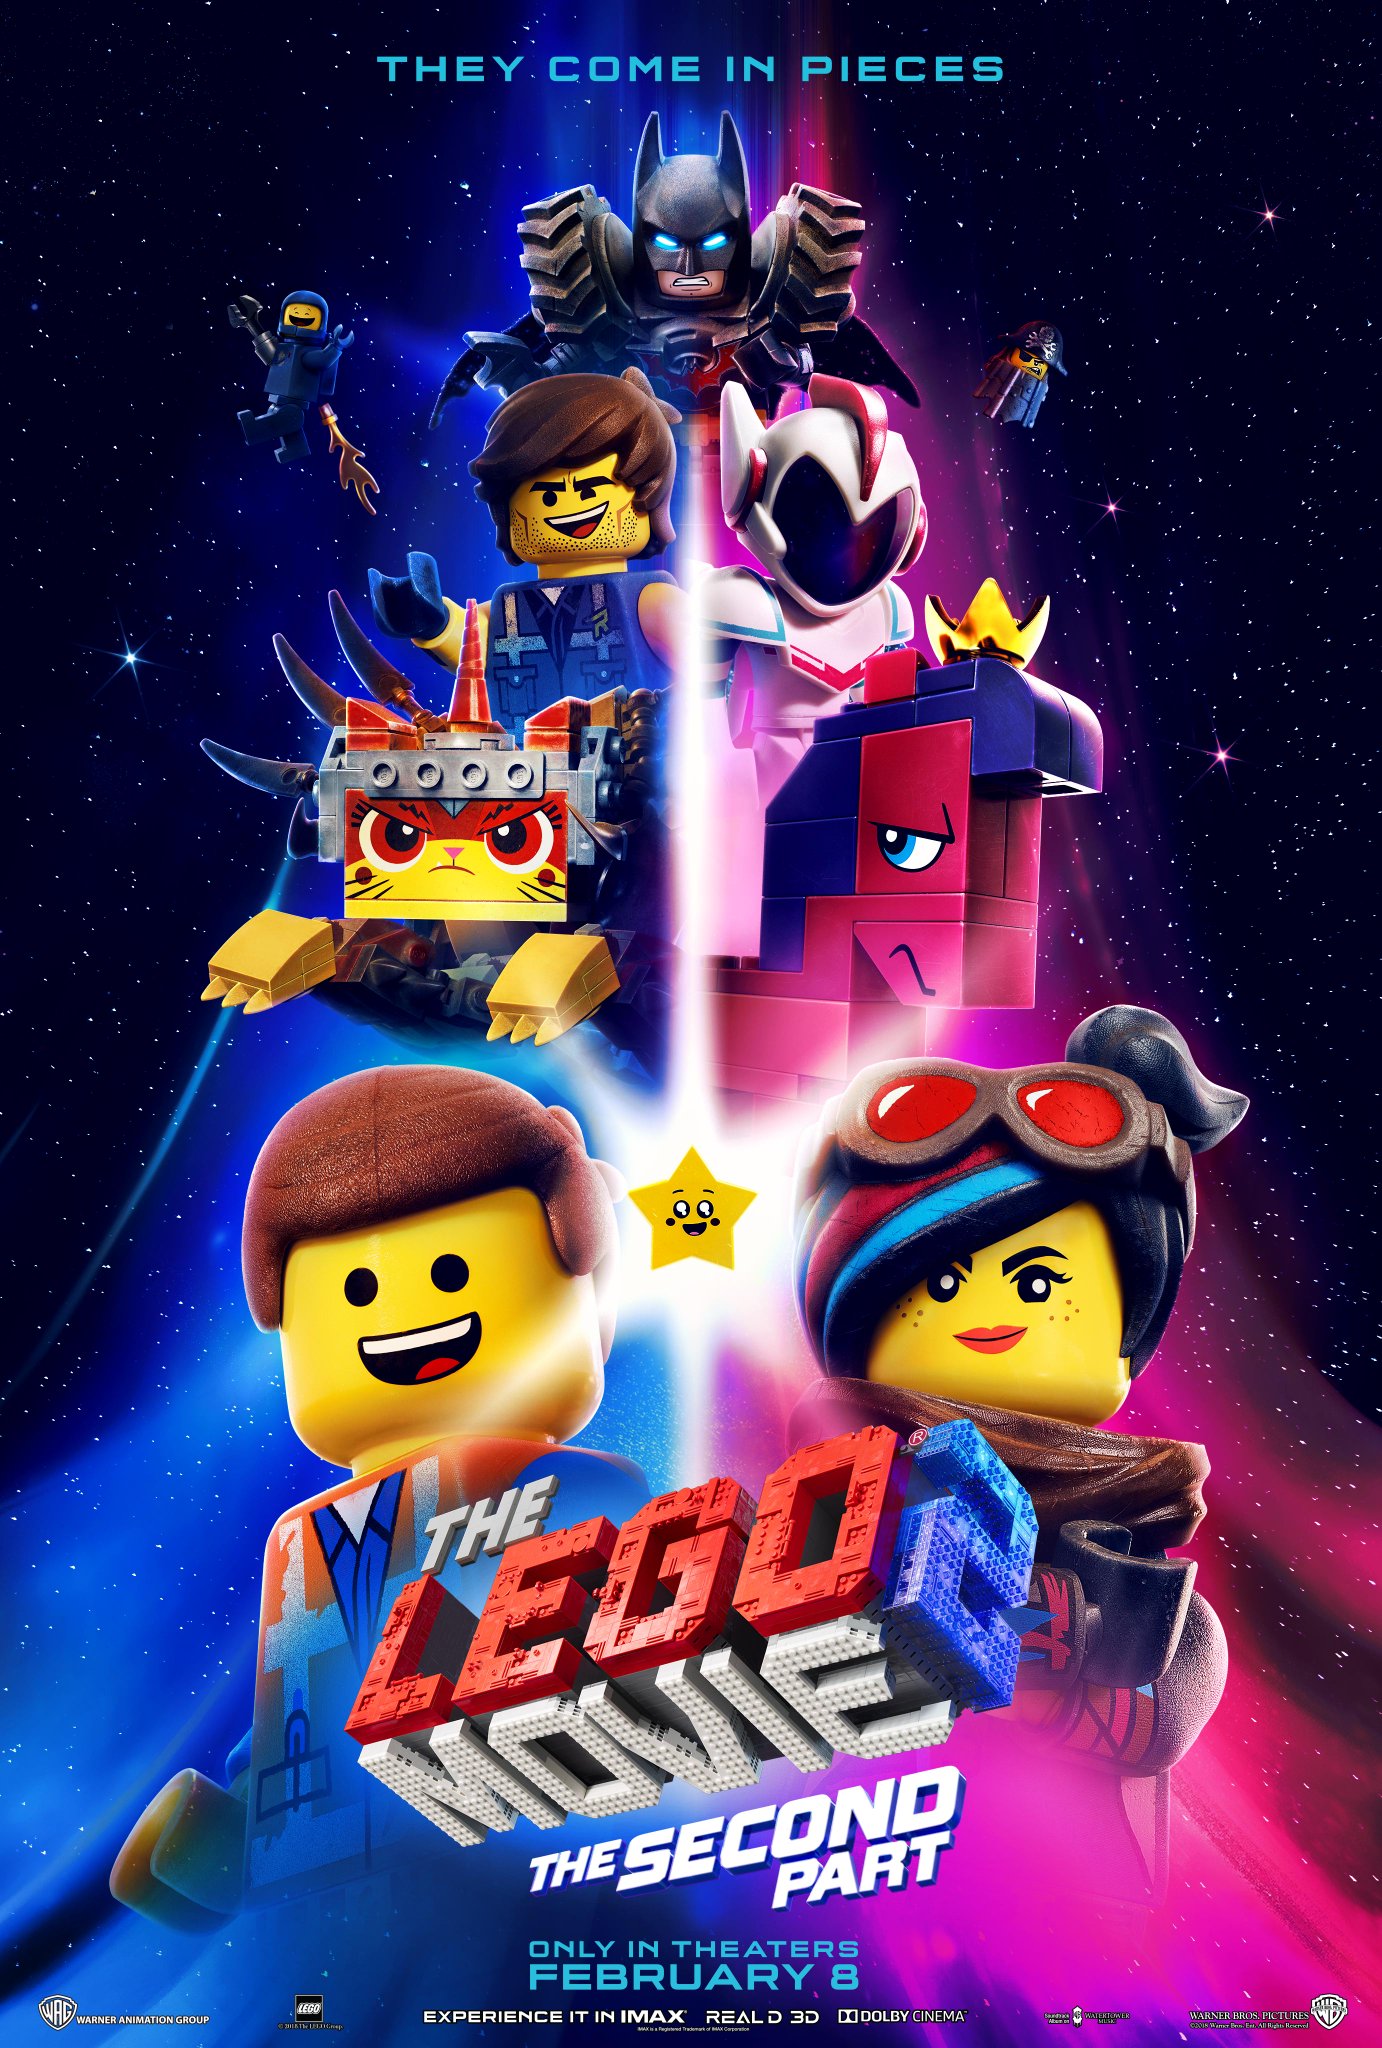 WATCH The LEGO Movie 2 gets new trailer and posters... Following The